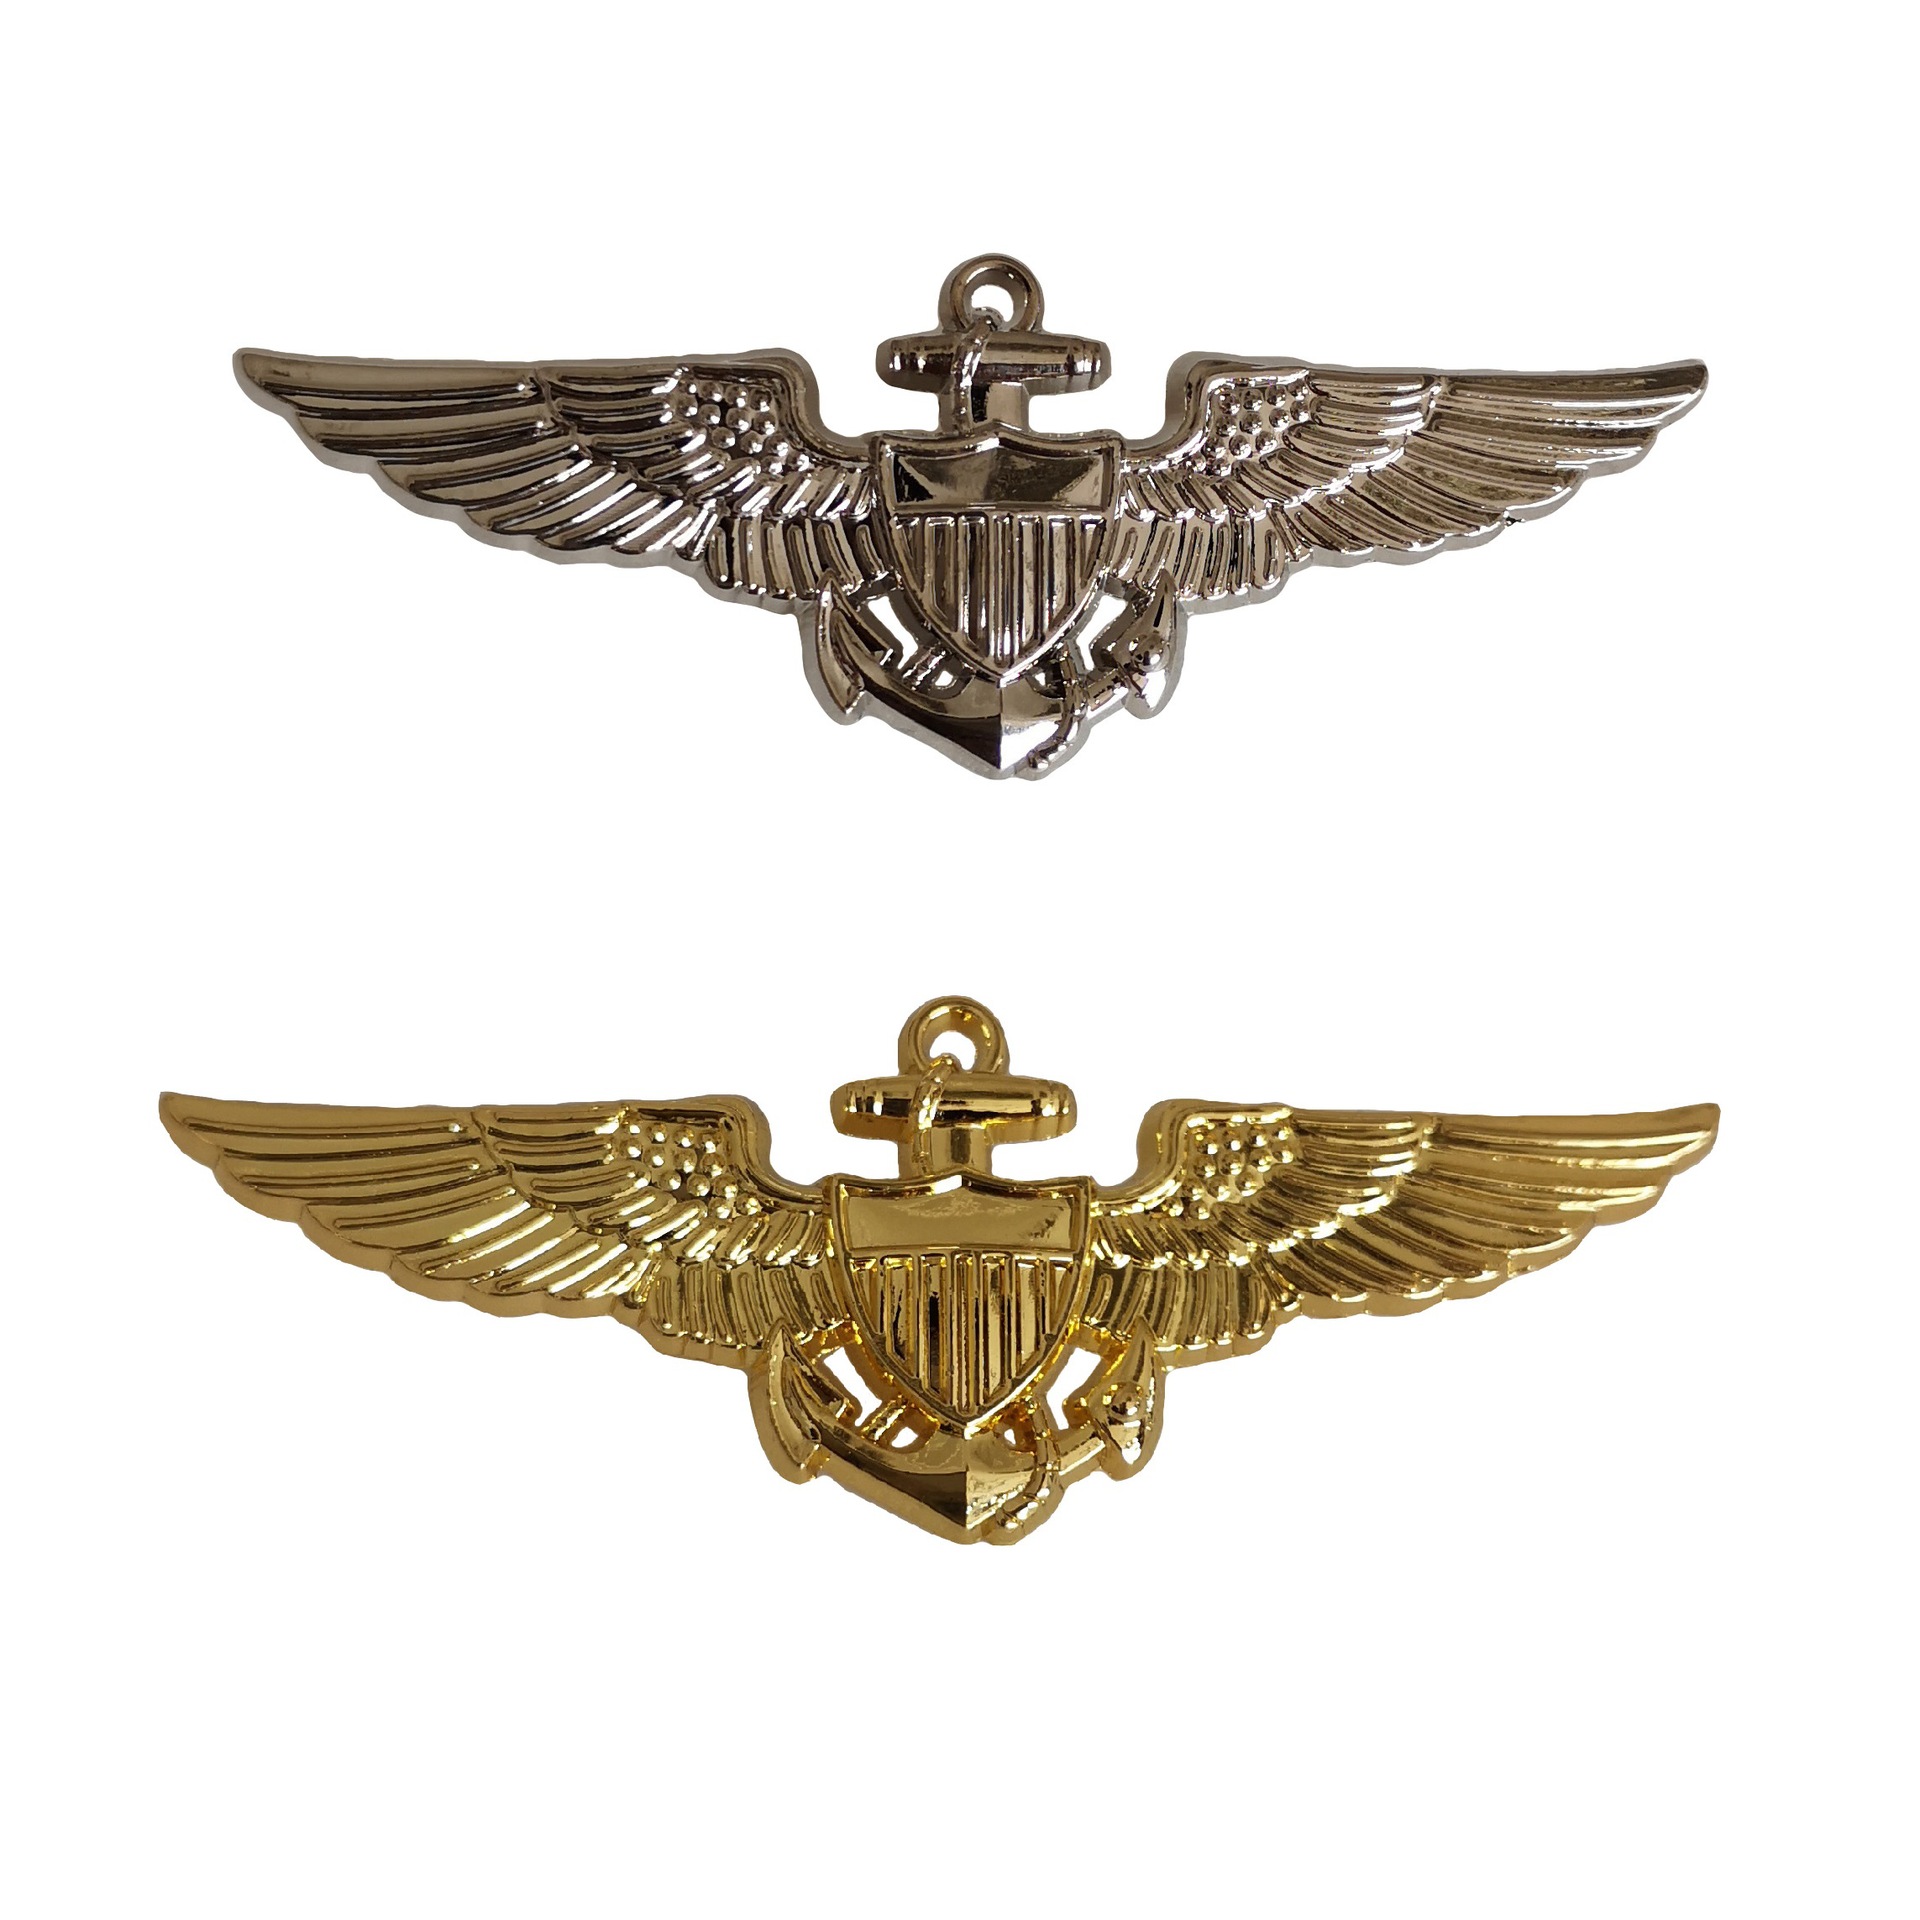 U.S.A Airman navy air force Pilot Chest badge The U.S. Metal badge Navigation Army fans Collection